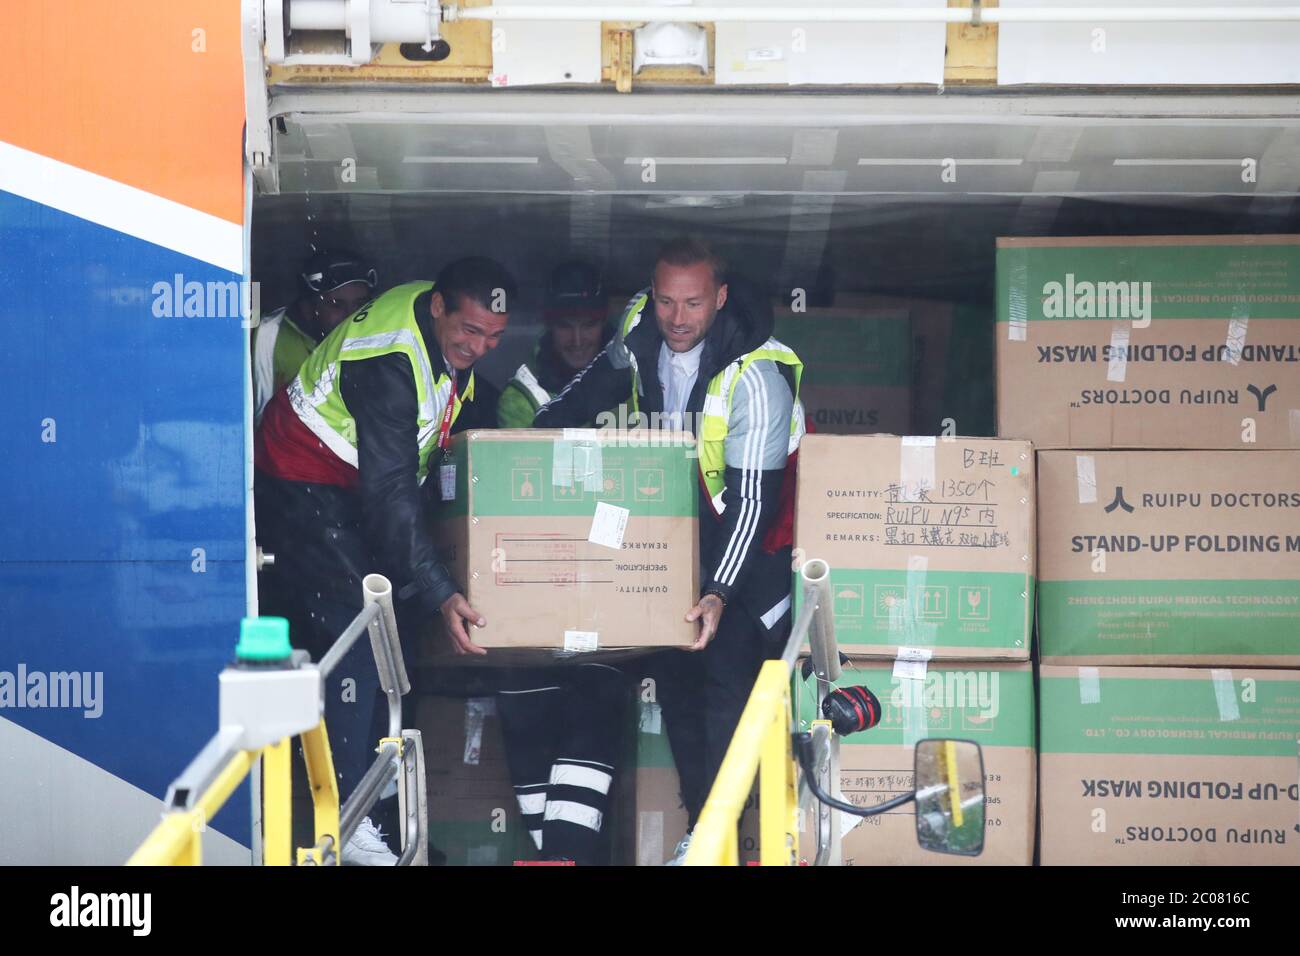 Calum Best (right) and Tamer Hassan help to unload boxes of Personal Protection Equipment (PPE) from a plane at Robin Hood Airport in Doncaster, South Yorkshire. ??30,000 worth of PPE has been donated to the Mask Our Heroes charity, which was set up by entrepreneur Matthew McGahan in the wake of the coronavirus outbreak to help supply frontline NHS and health workers with the protective equipment they need. Stock Photo